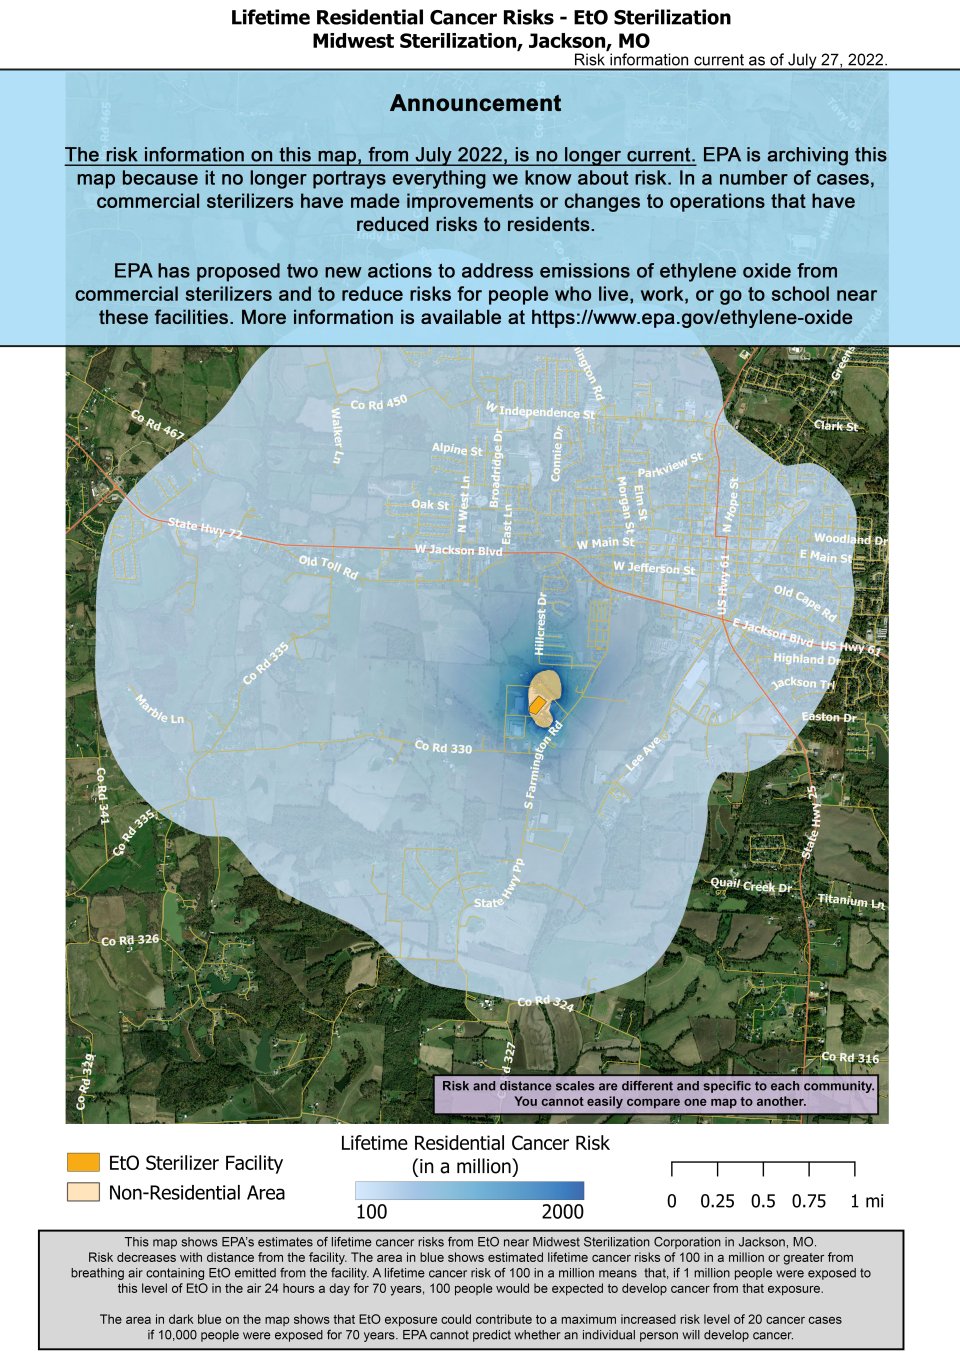 This map shows EPA’s estimate of lifetime cancer risks from breathing ethylene oxide near Midwest Sterilization Corp, 1204 Lenco Ave, Jackson, MO. Estimated cancer risk decreases with distance from the facility.  Nearest the facility, the estimated lifetime cancer risk is 2,000 in a million. This risk drops to 100 in a million and extends to Litz Park to the east, to the junction of County Lane and State highway D to the north, almost to County Road 341 to the west and County Road 324 to the south. 